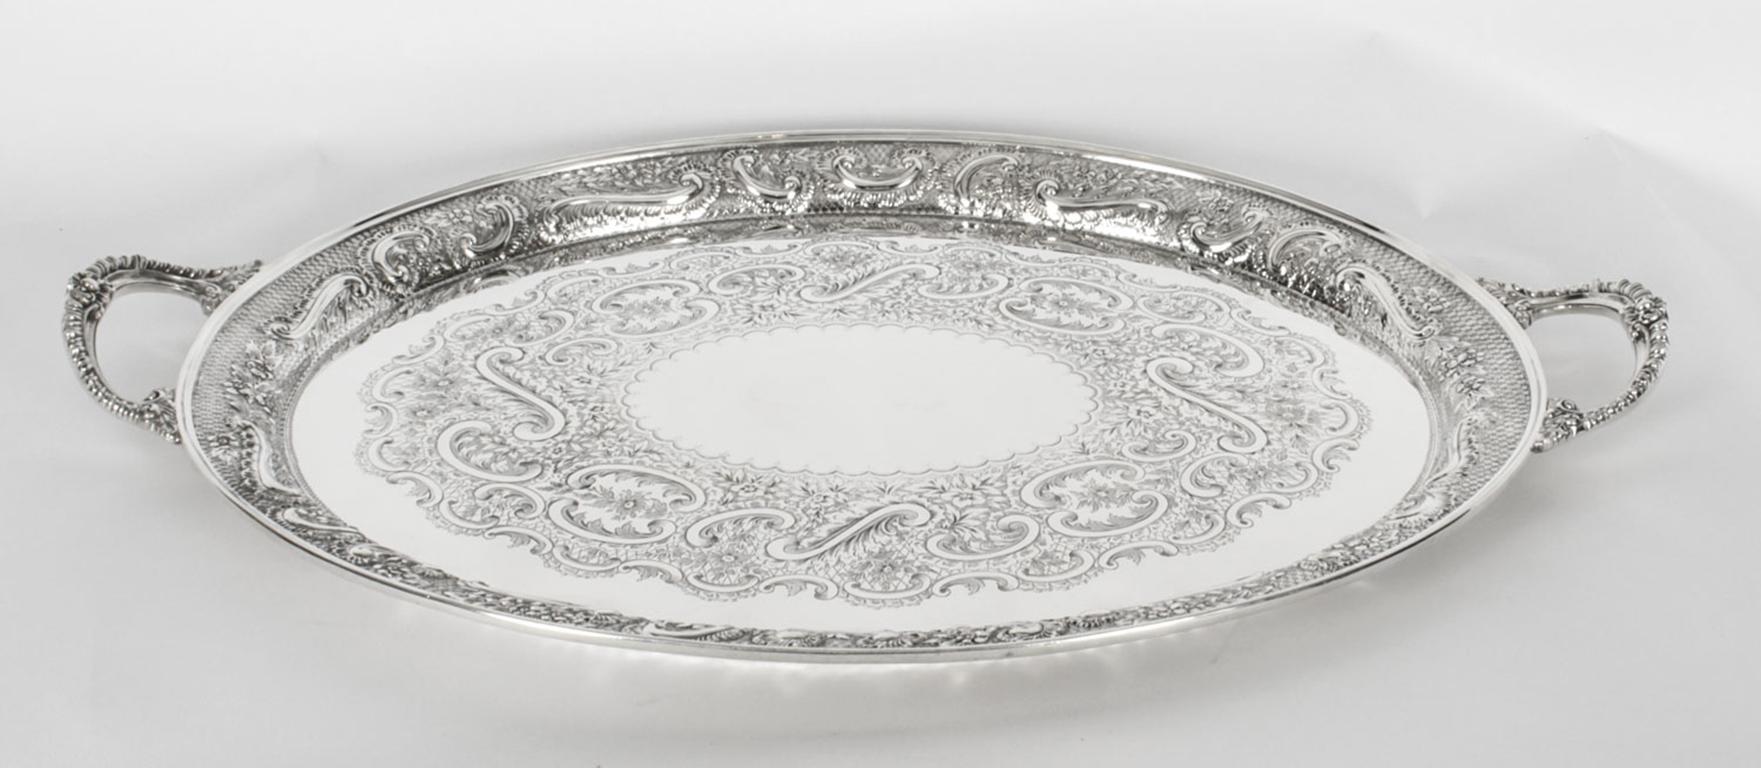 This is a magnificent antique English Victorian oval silver-plated twin handled tray by the renowned Silversmith Mappin & Webb, circa 1880 in date.
 
This splendid tray features beautifully engraved and embossed foliate and floral decoration with